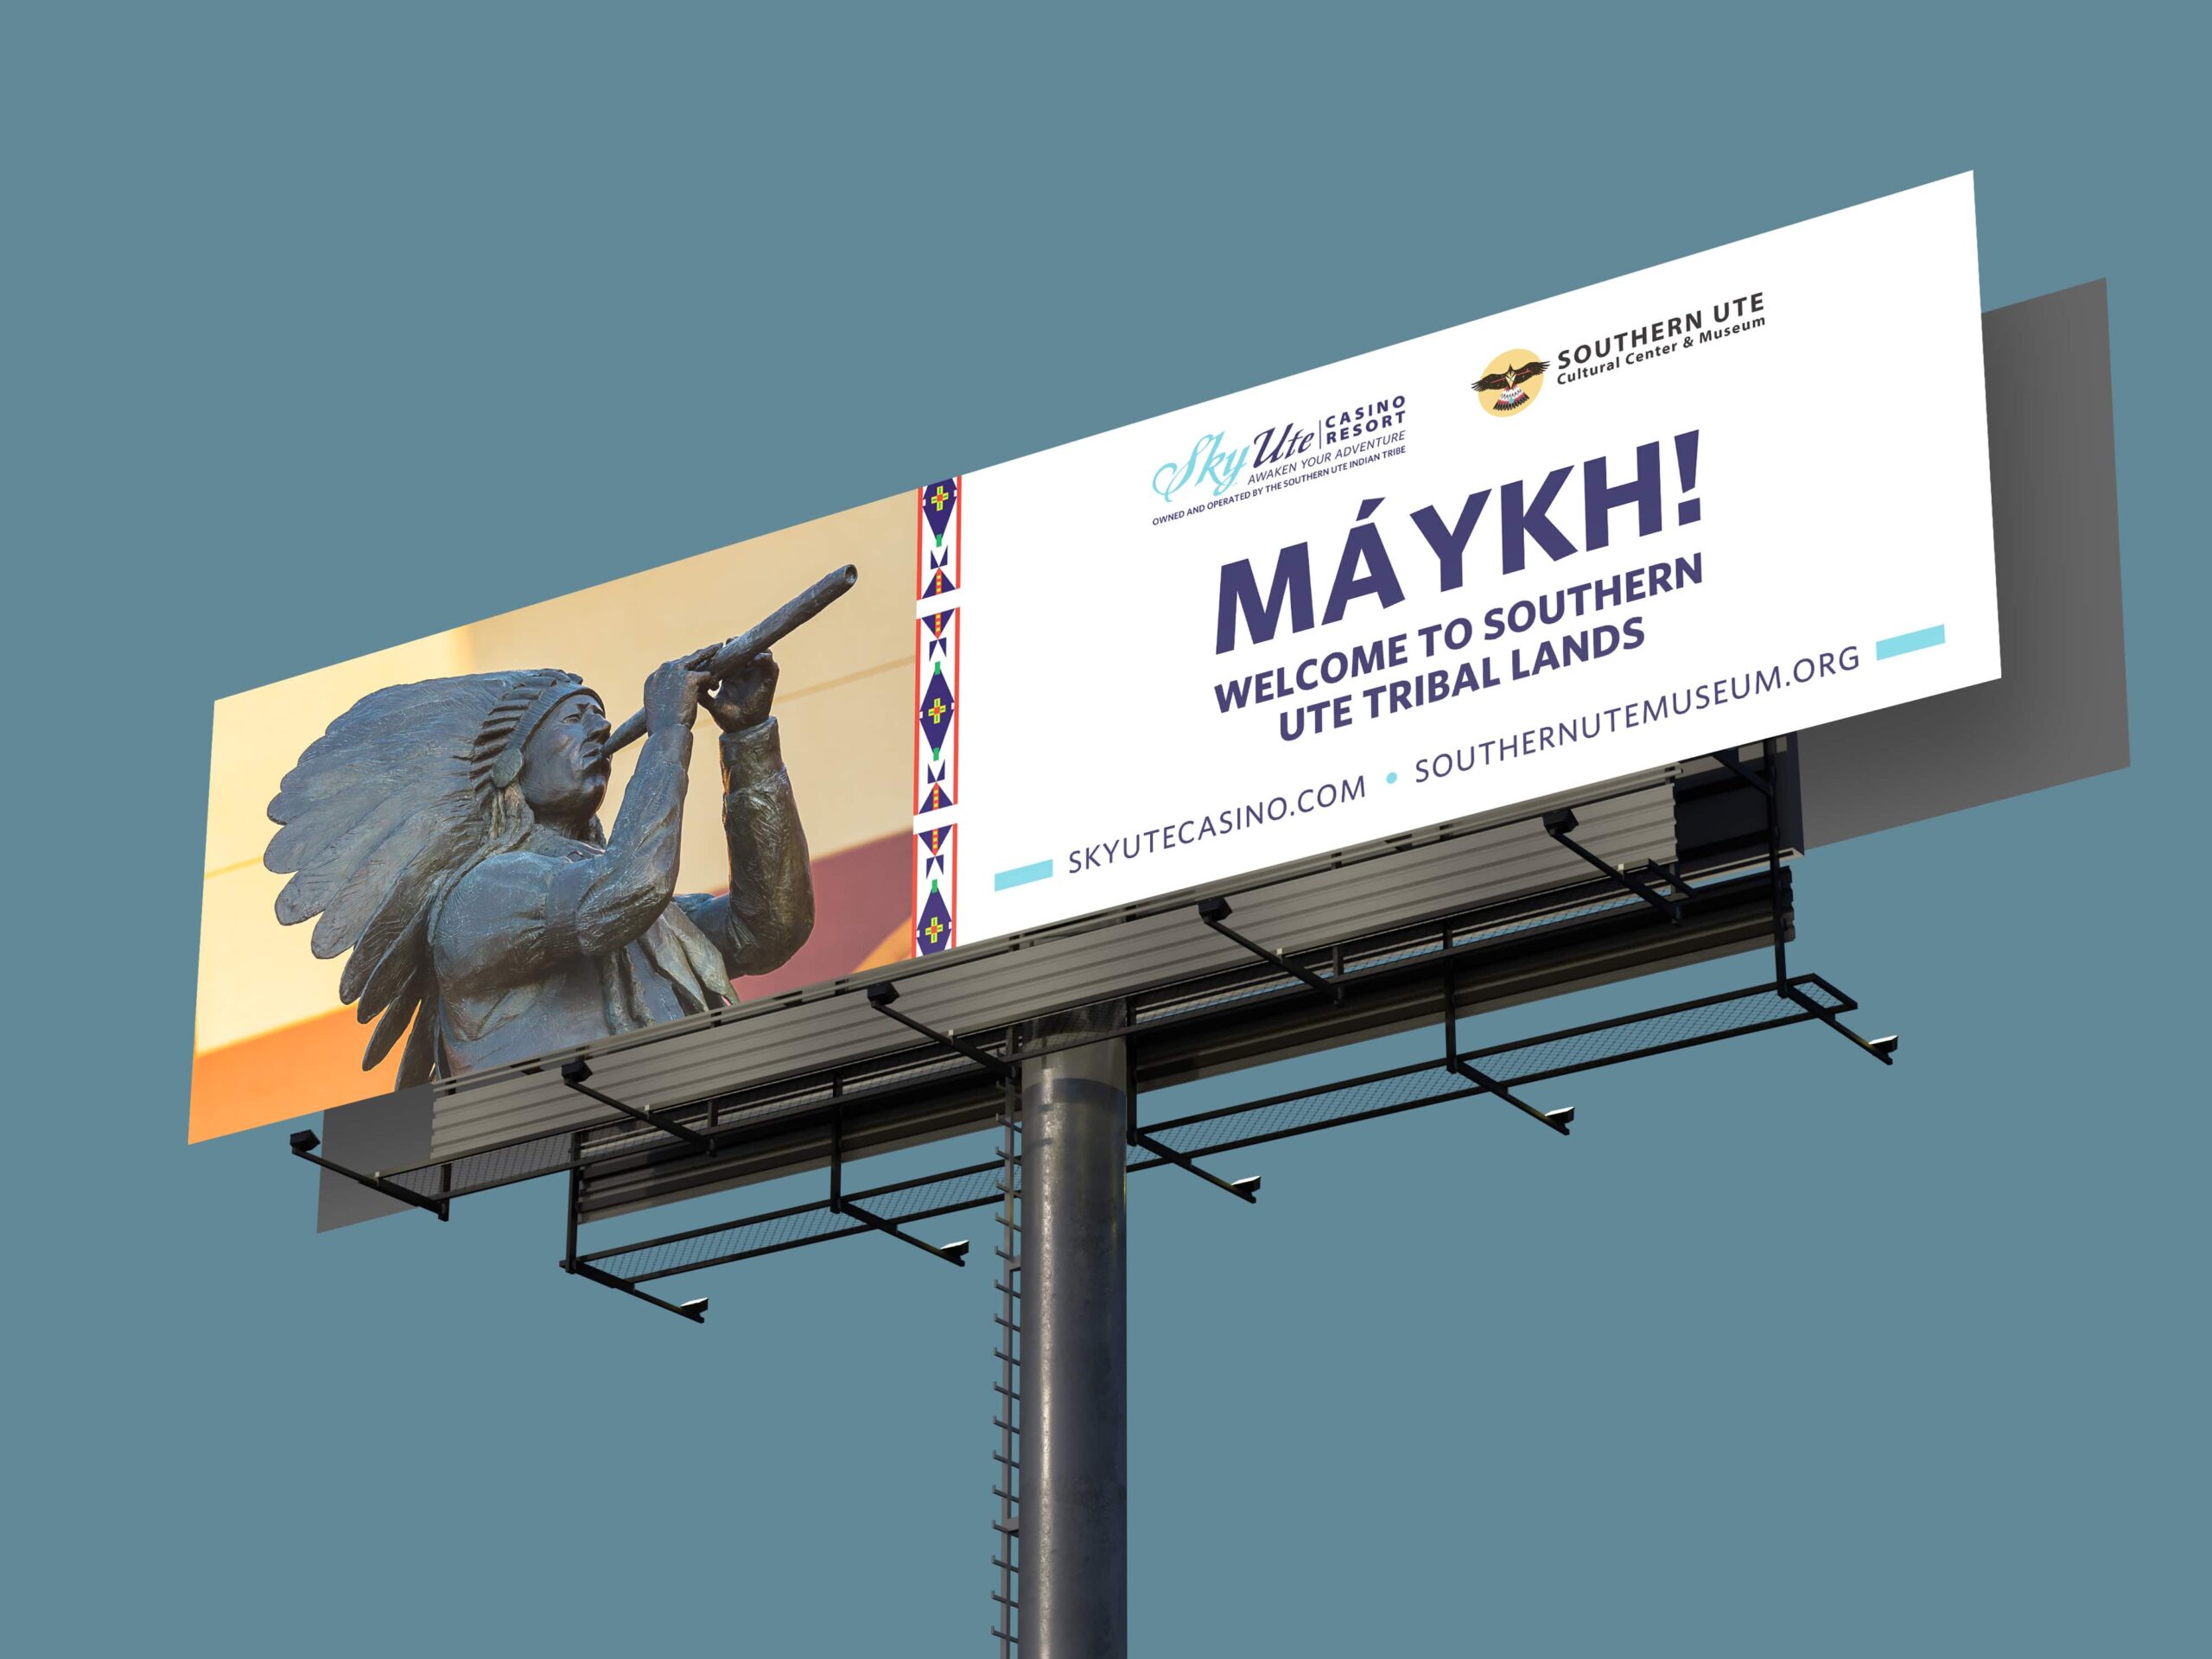 billboard mockup for sky ute casino with statue of native american playing a flute